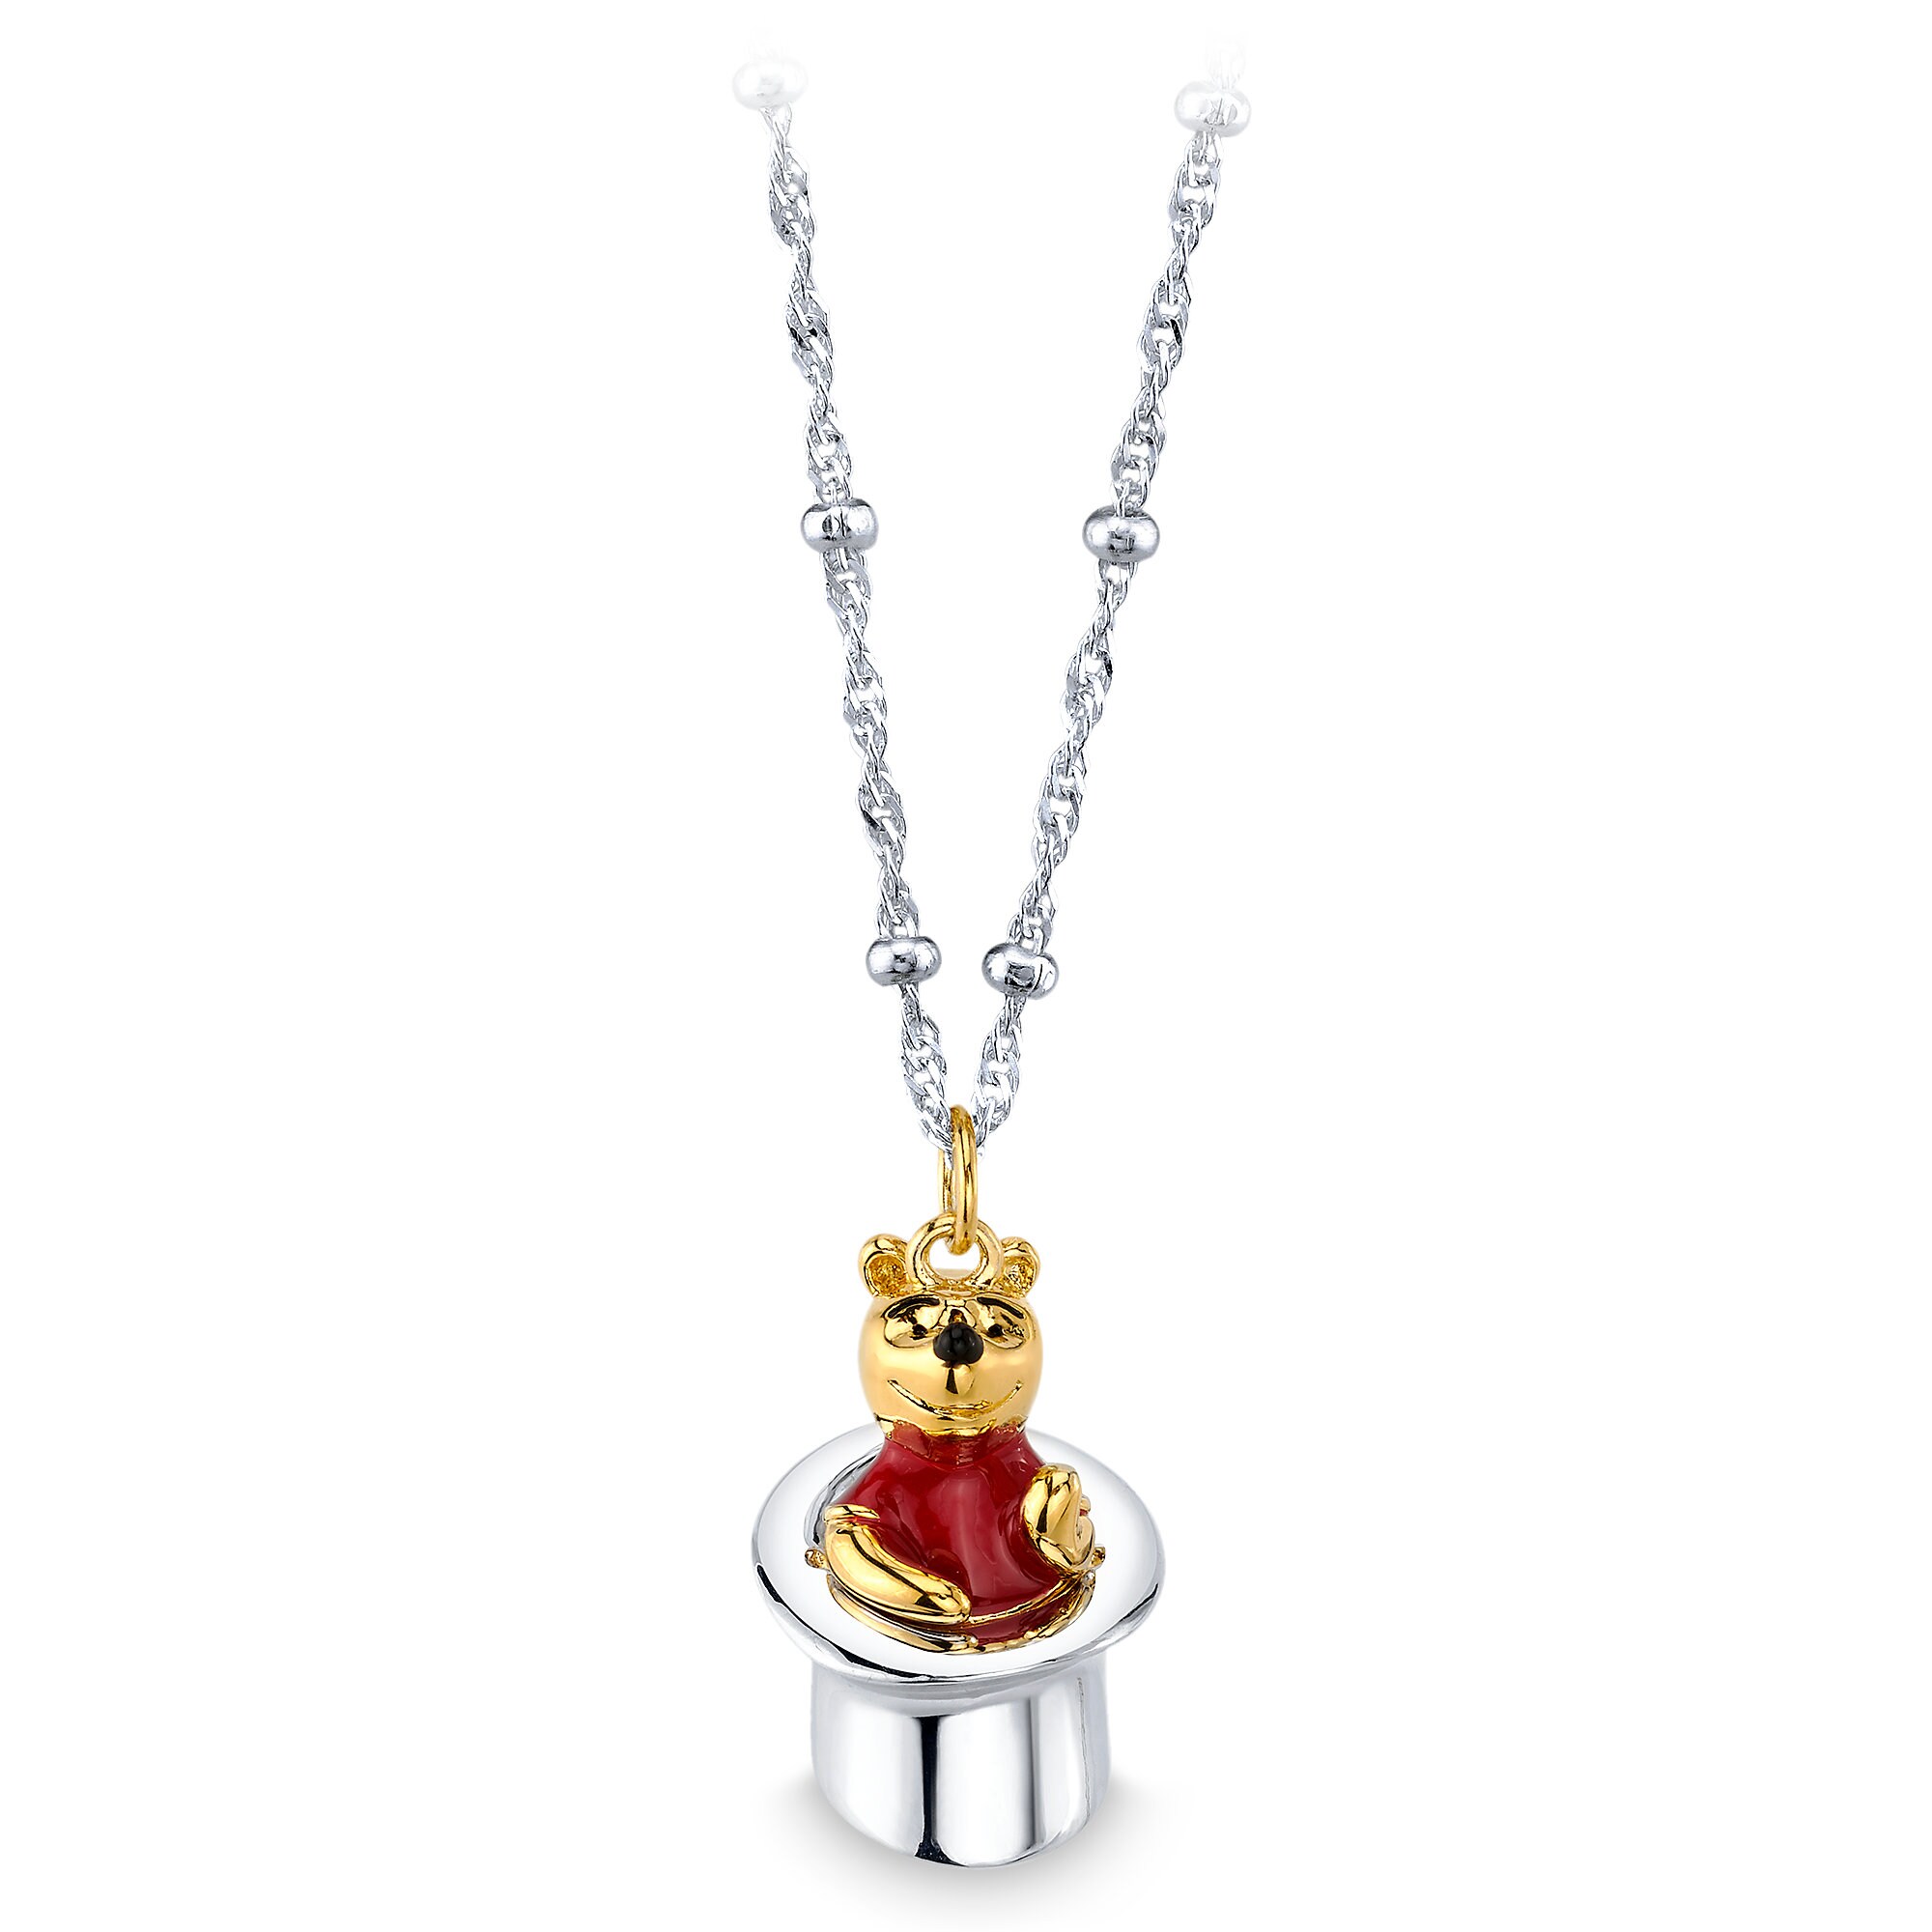 Winnie the Pooh Top Hat Necklace by RockLove - Christopher Robin